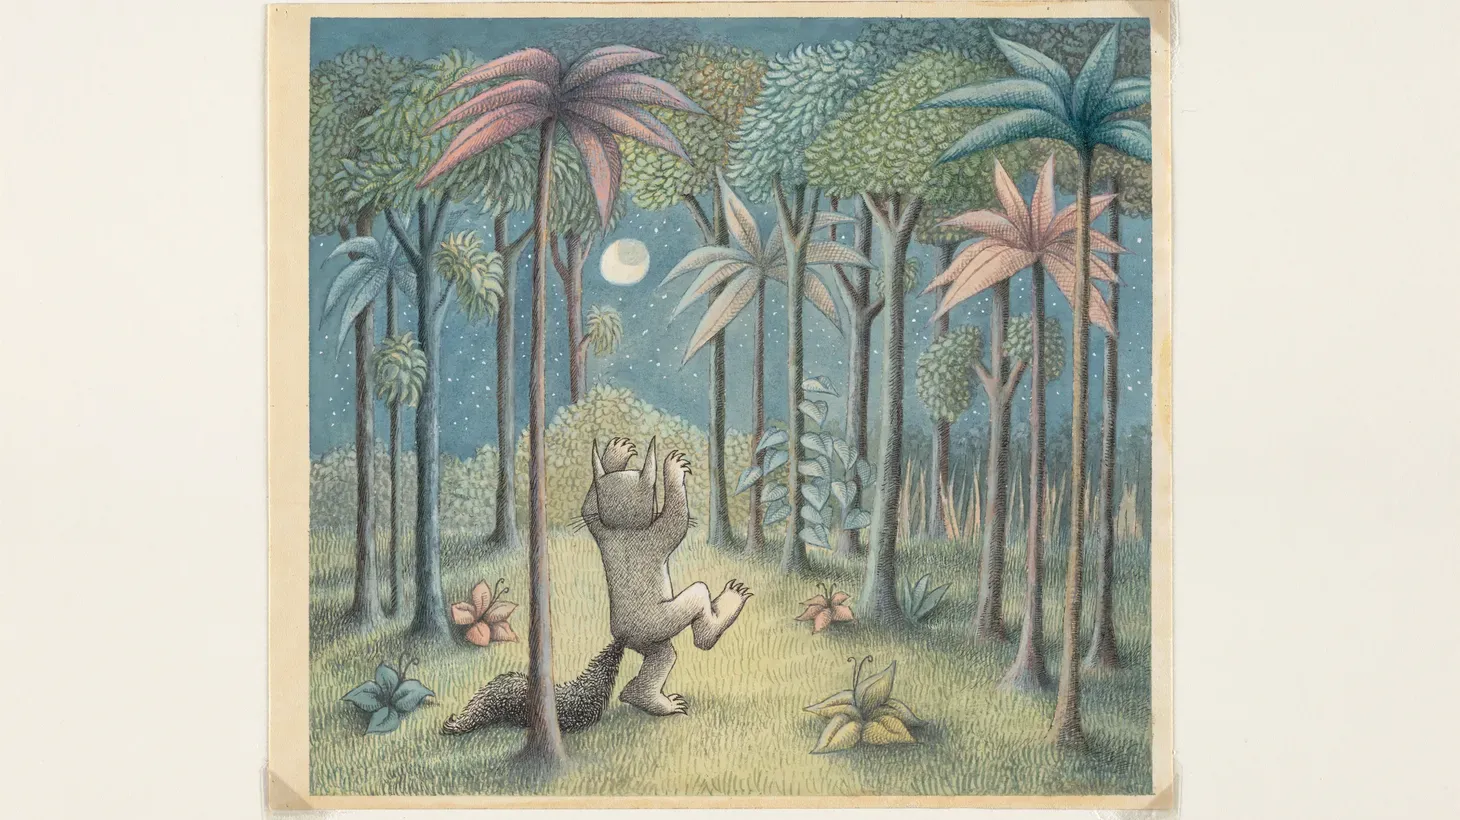 “What we really like to emphasize at our display of this exhibition is that these original works really showcase Sendak as a fine artist, not just a children's book illustrator,” says Skirball Center Managing Co-curator Sarah Daymude.